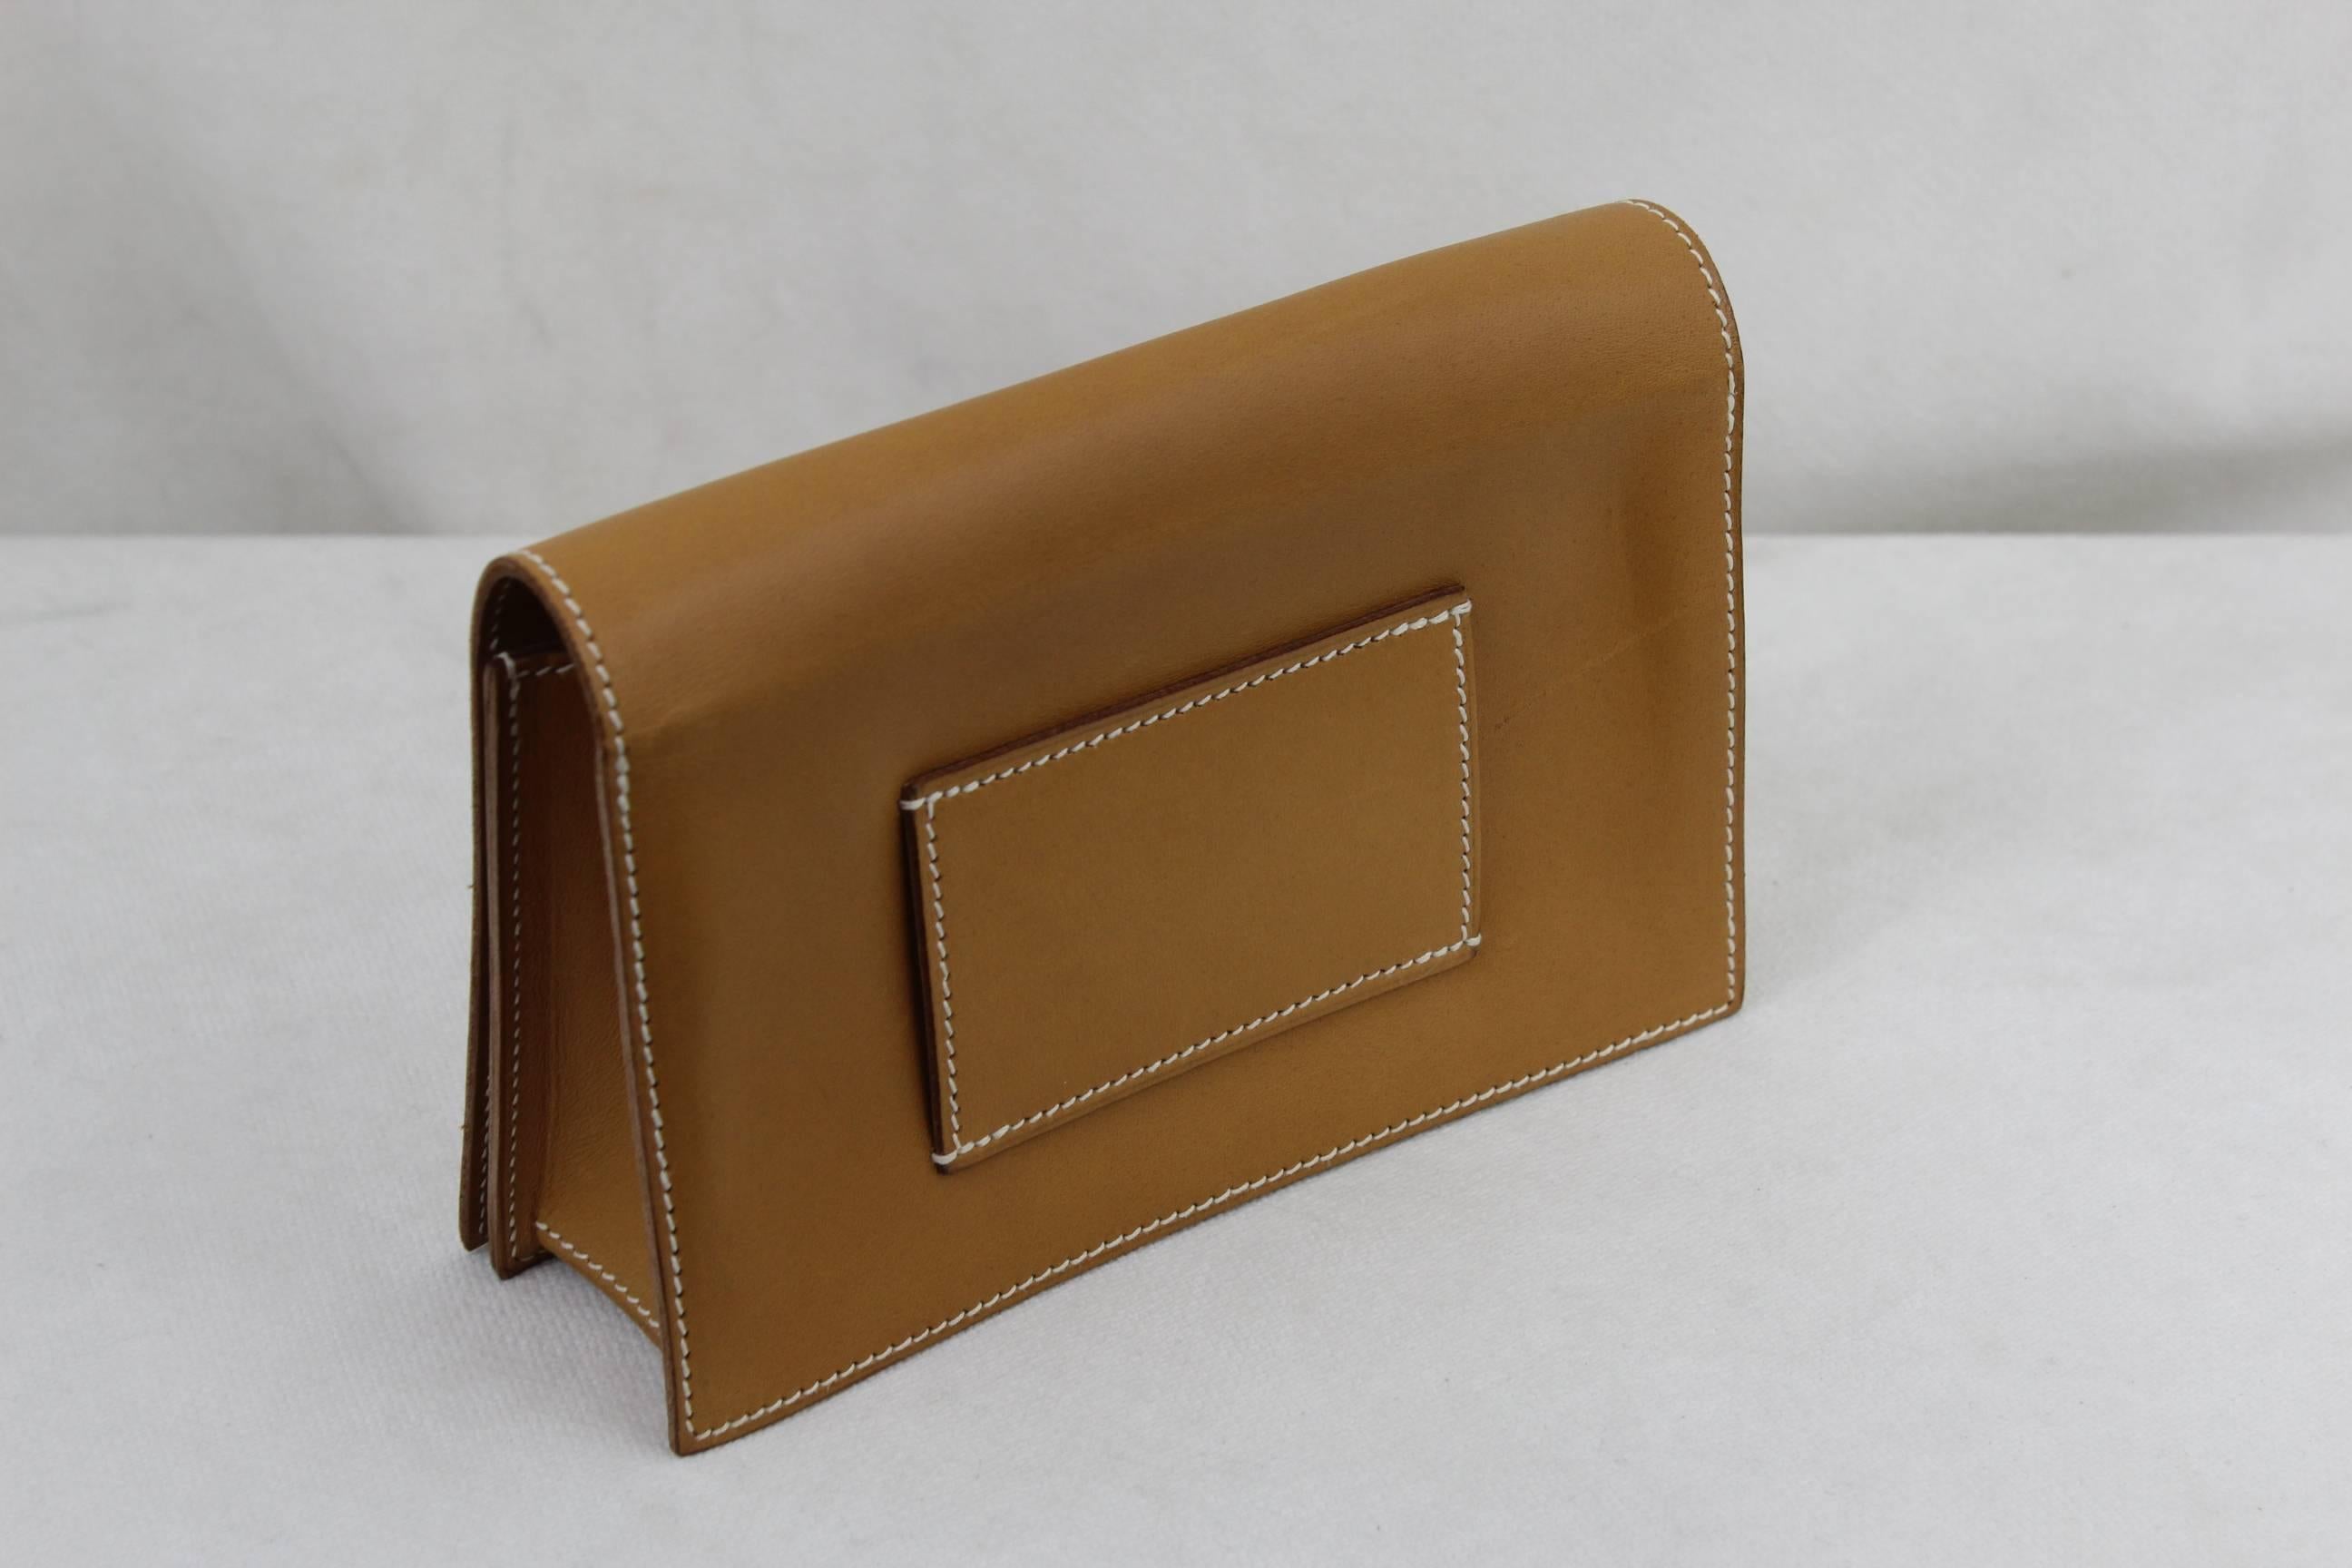 Nice Hermes Beltbag in natural gold leather

size 6.4x4.2

